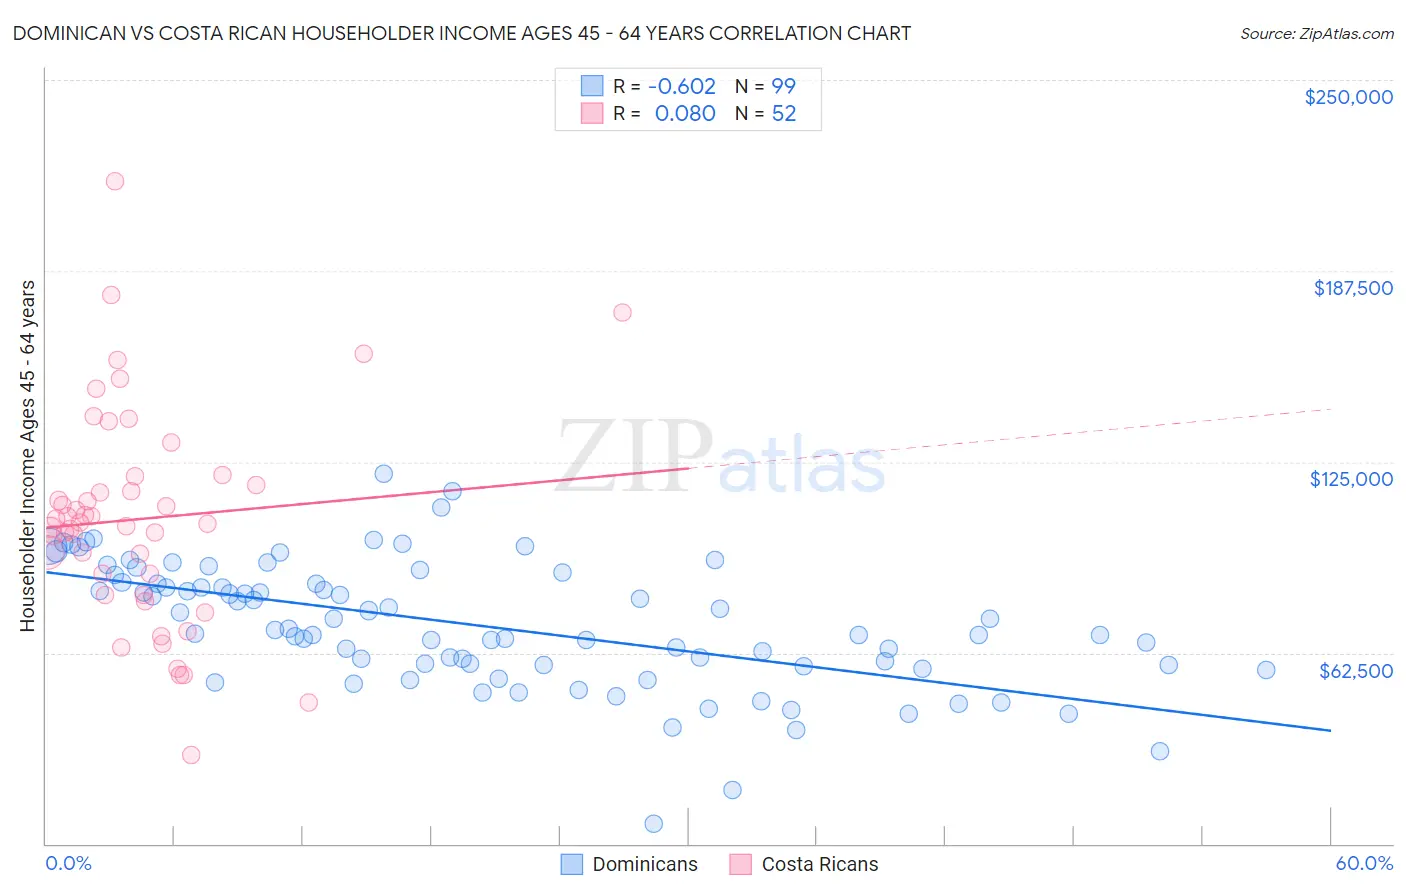 Dominican vs Costa Rican Householder Income Ages 45 - 64 years